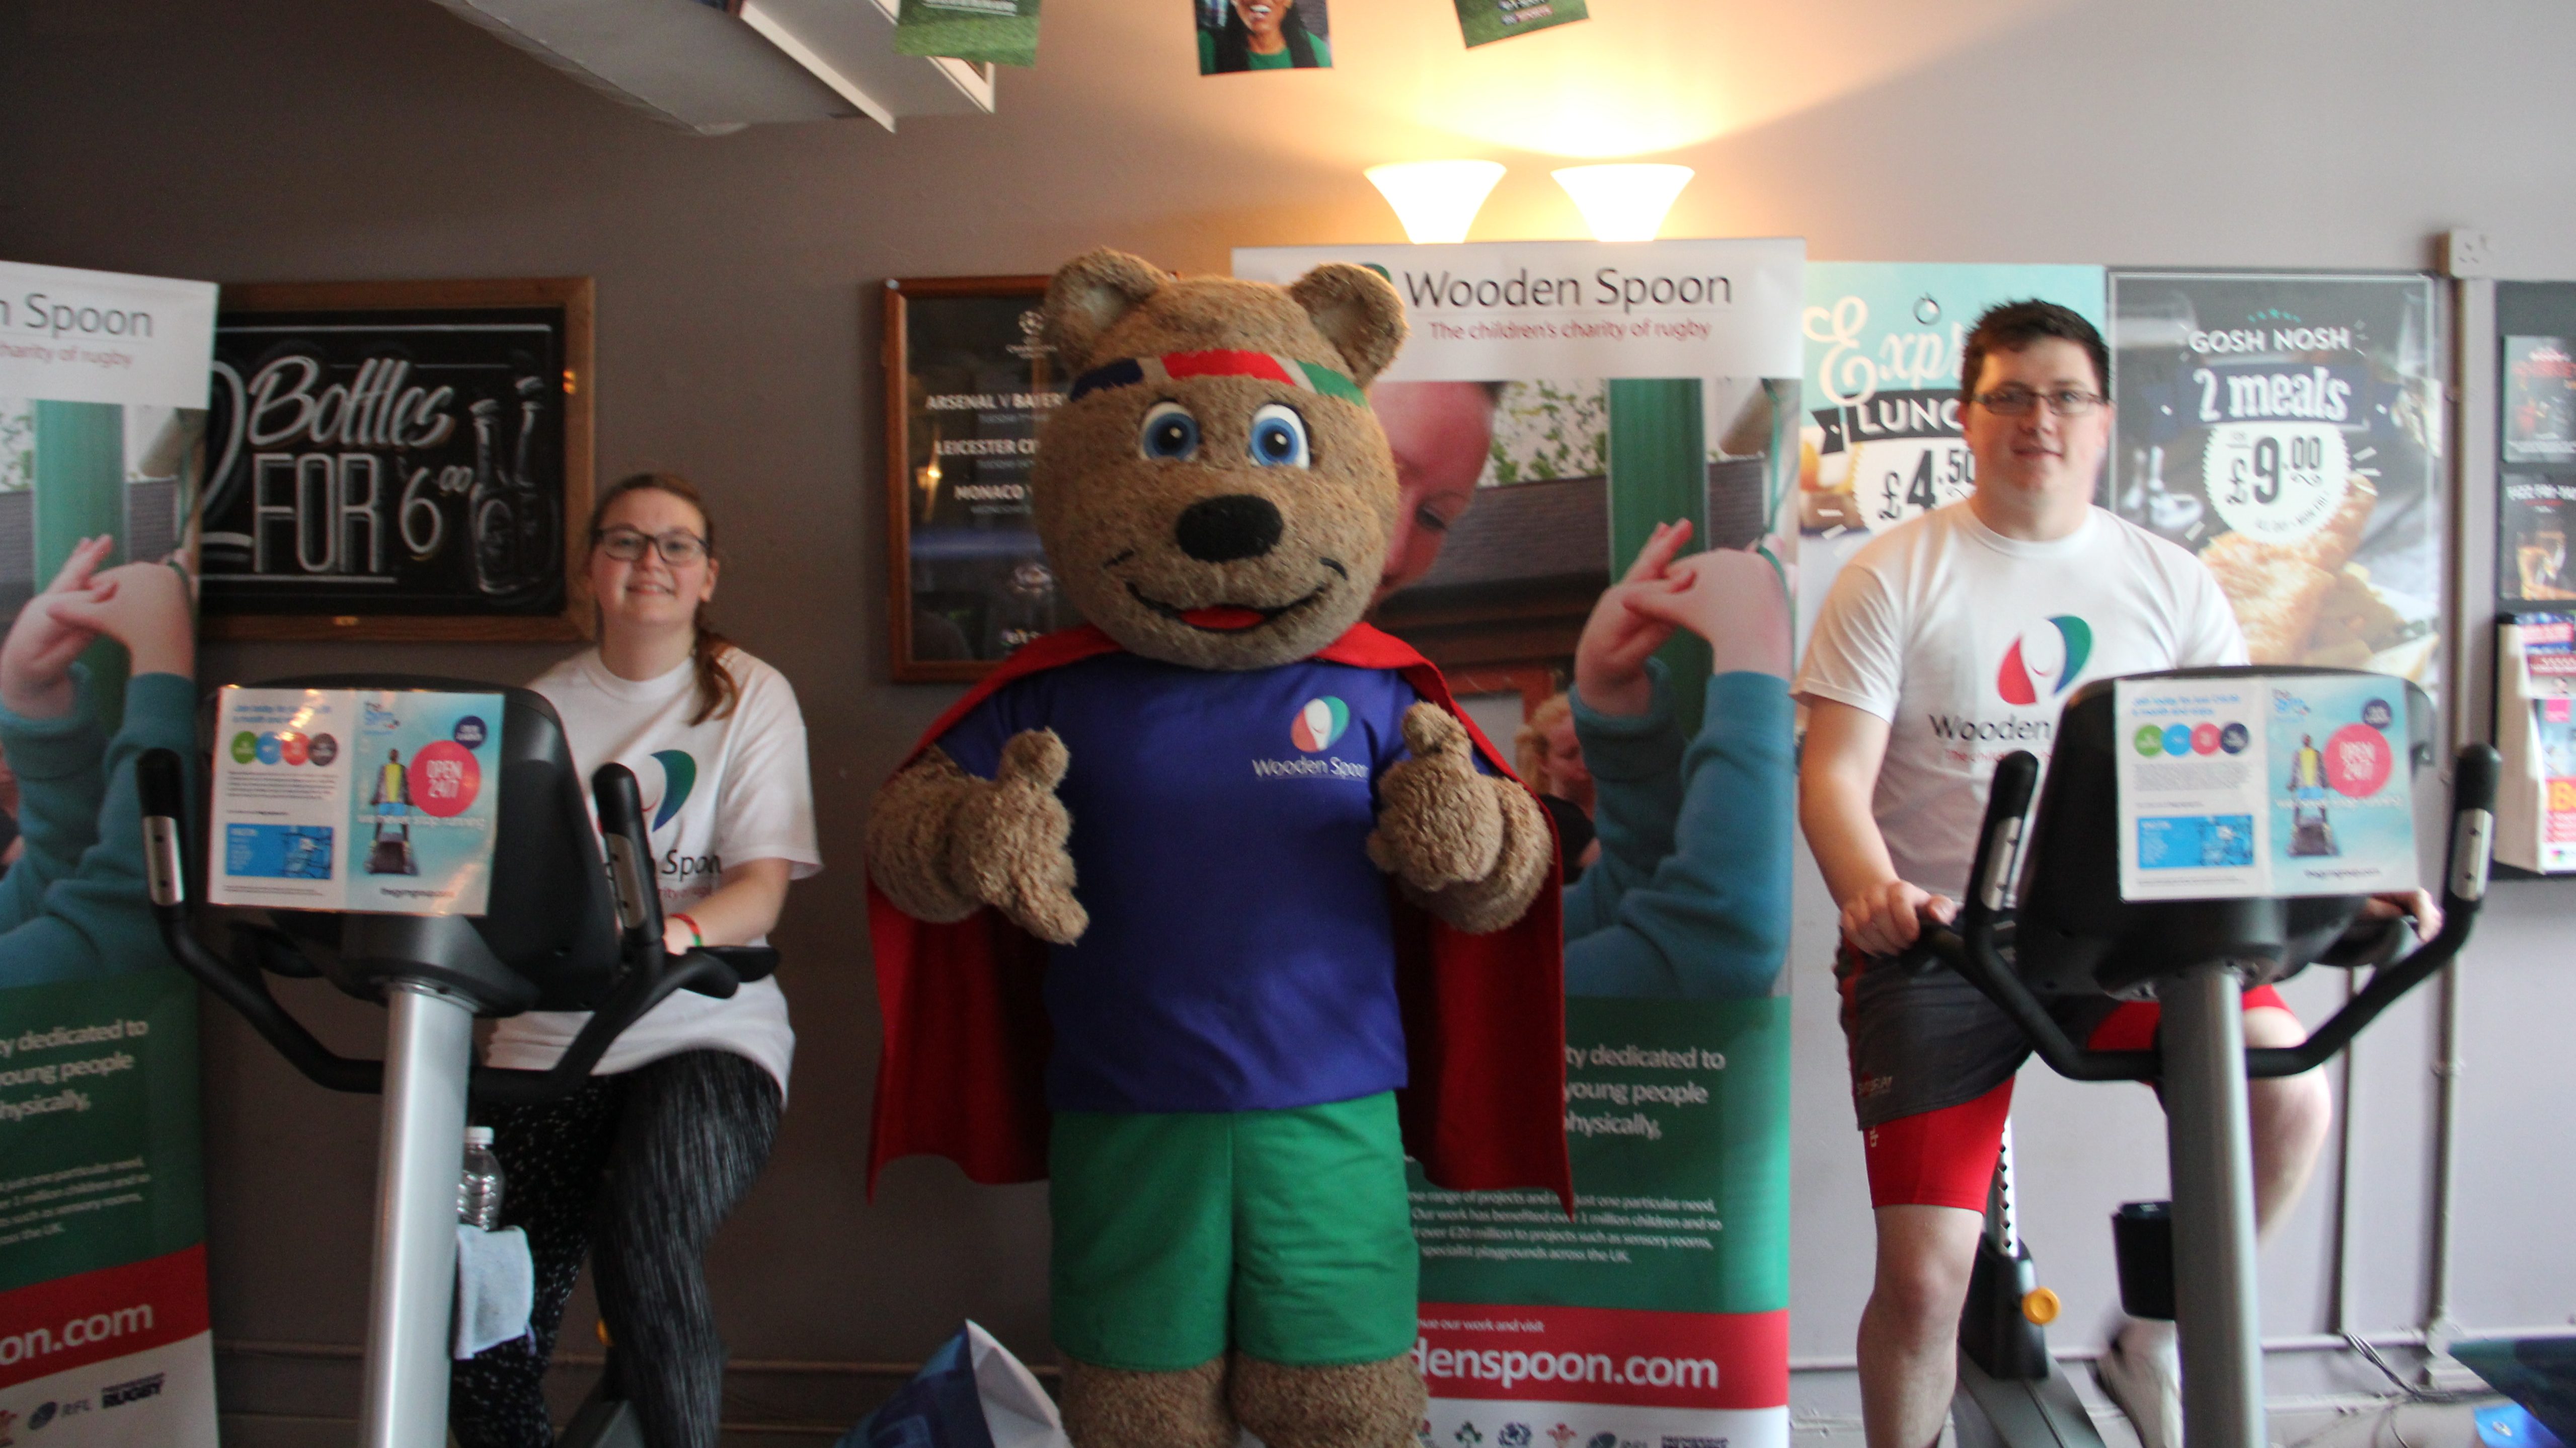 Kingston rugby teams compete in 12-hour exercise bike marathon for charity